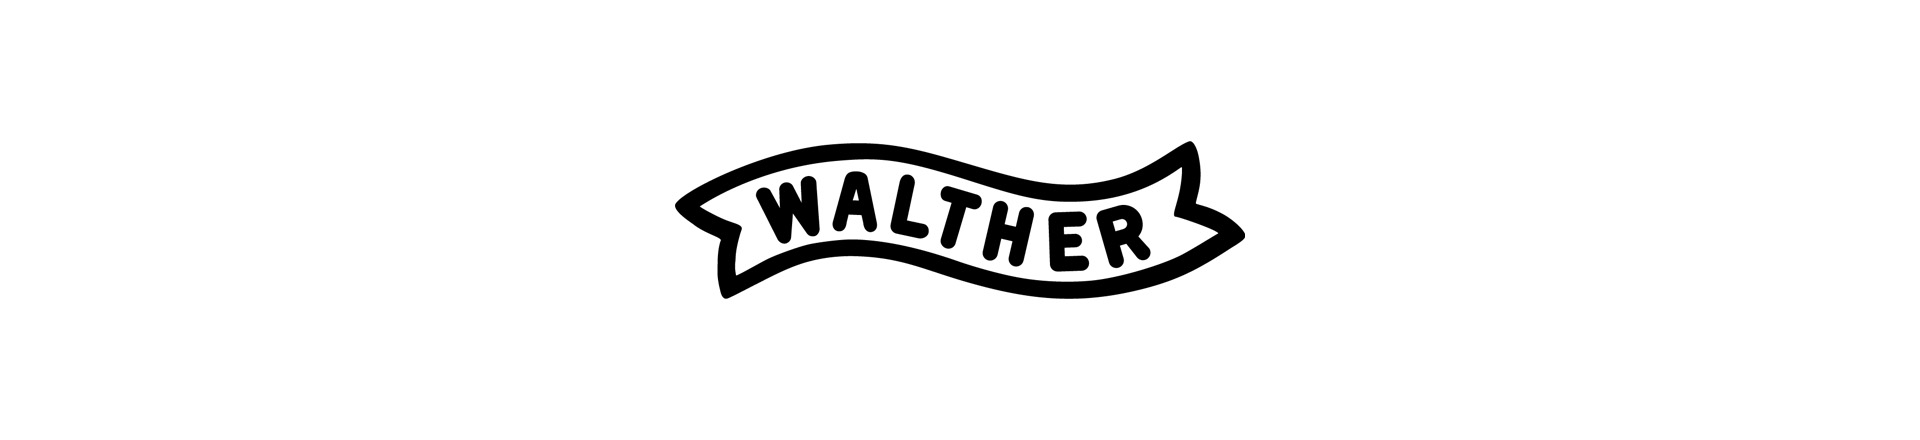 Walther banner1.jpg